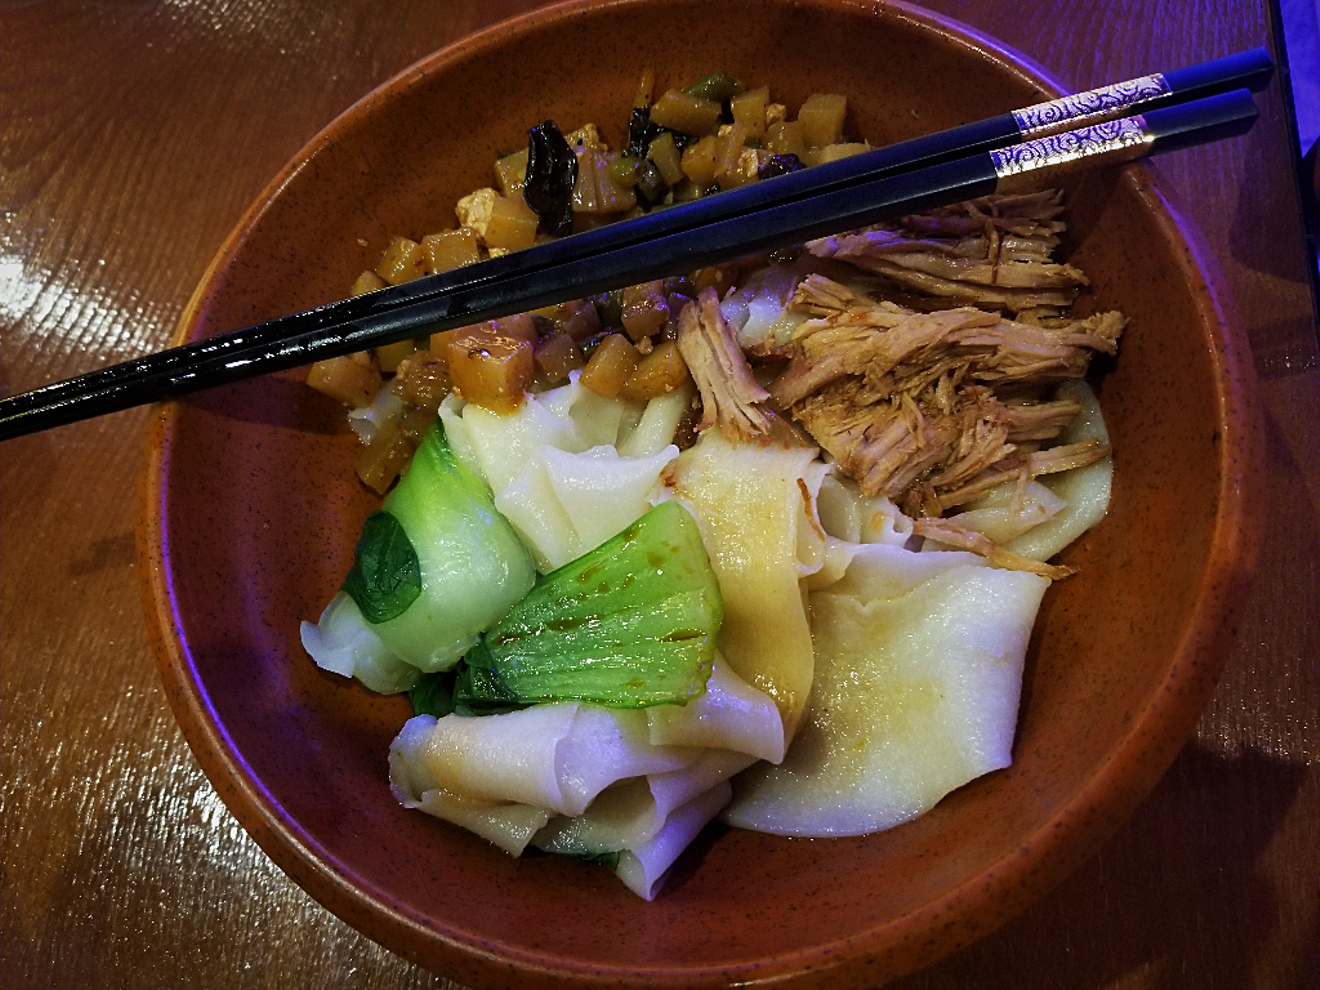 Thick biangbiang noodles with pork and veggies are a signature specialty at Shaanxi Chinese Restaurant in Mesa.